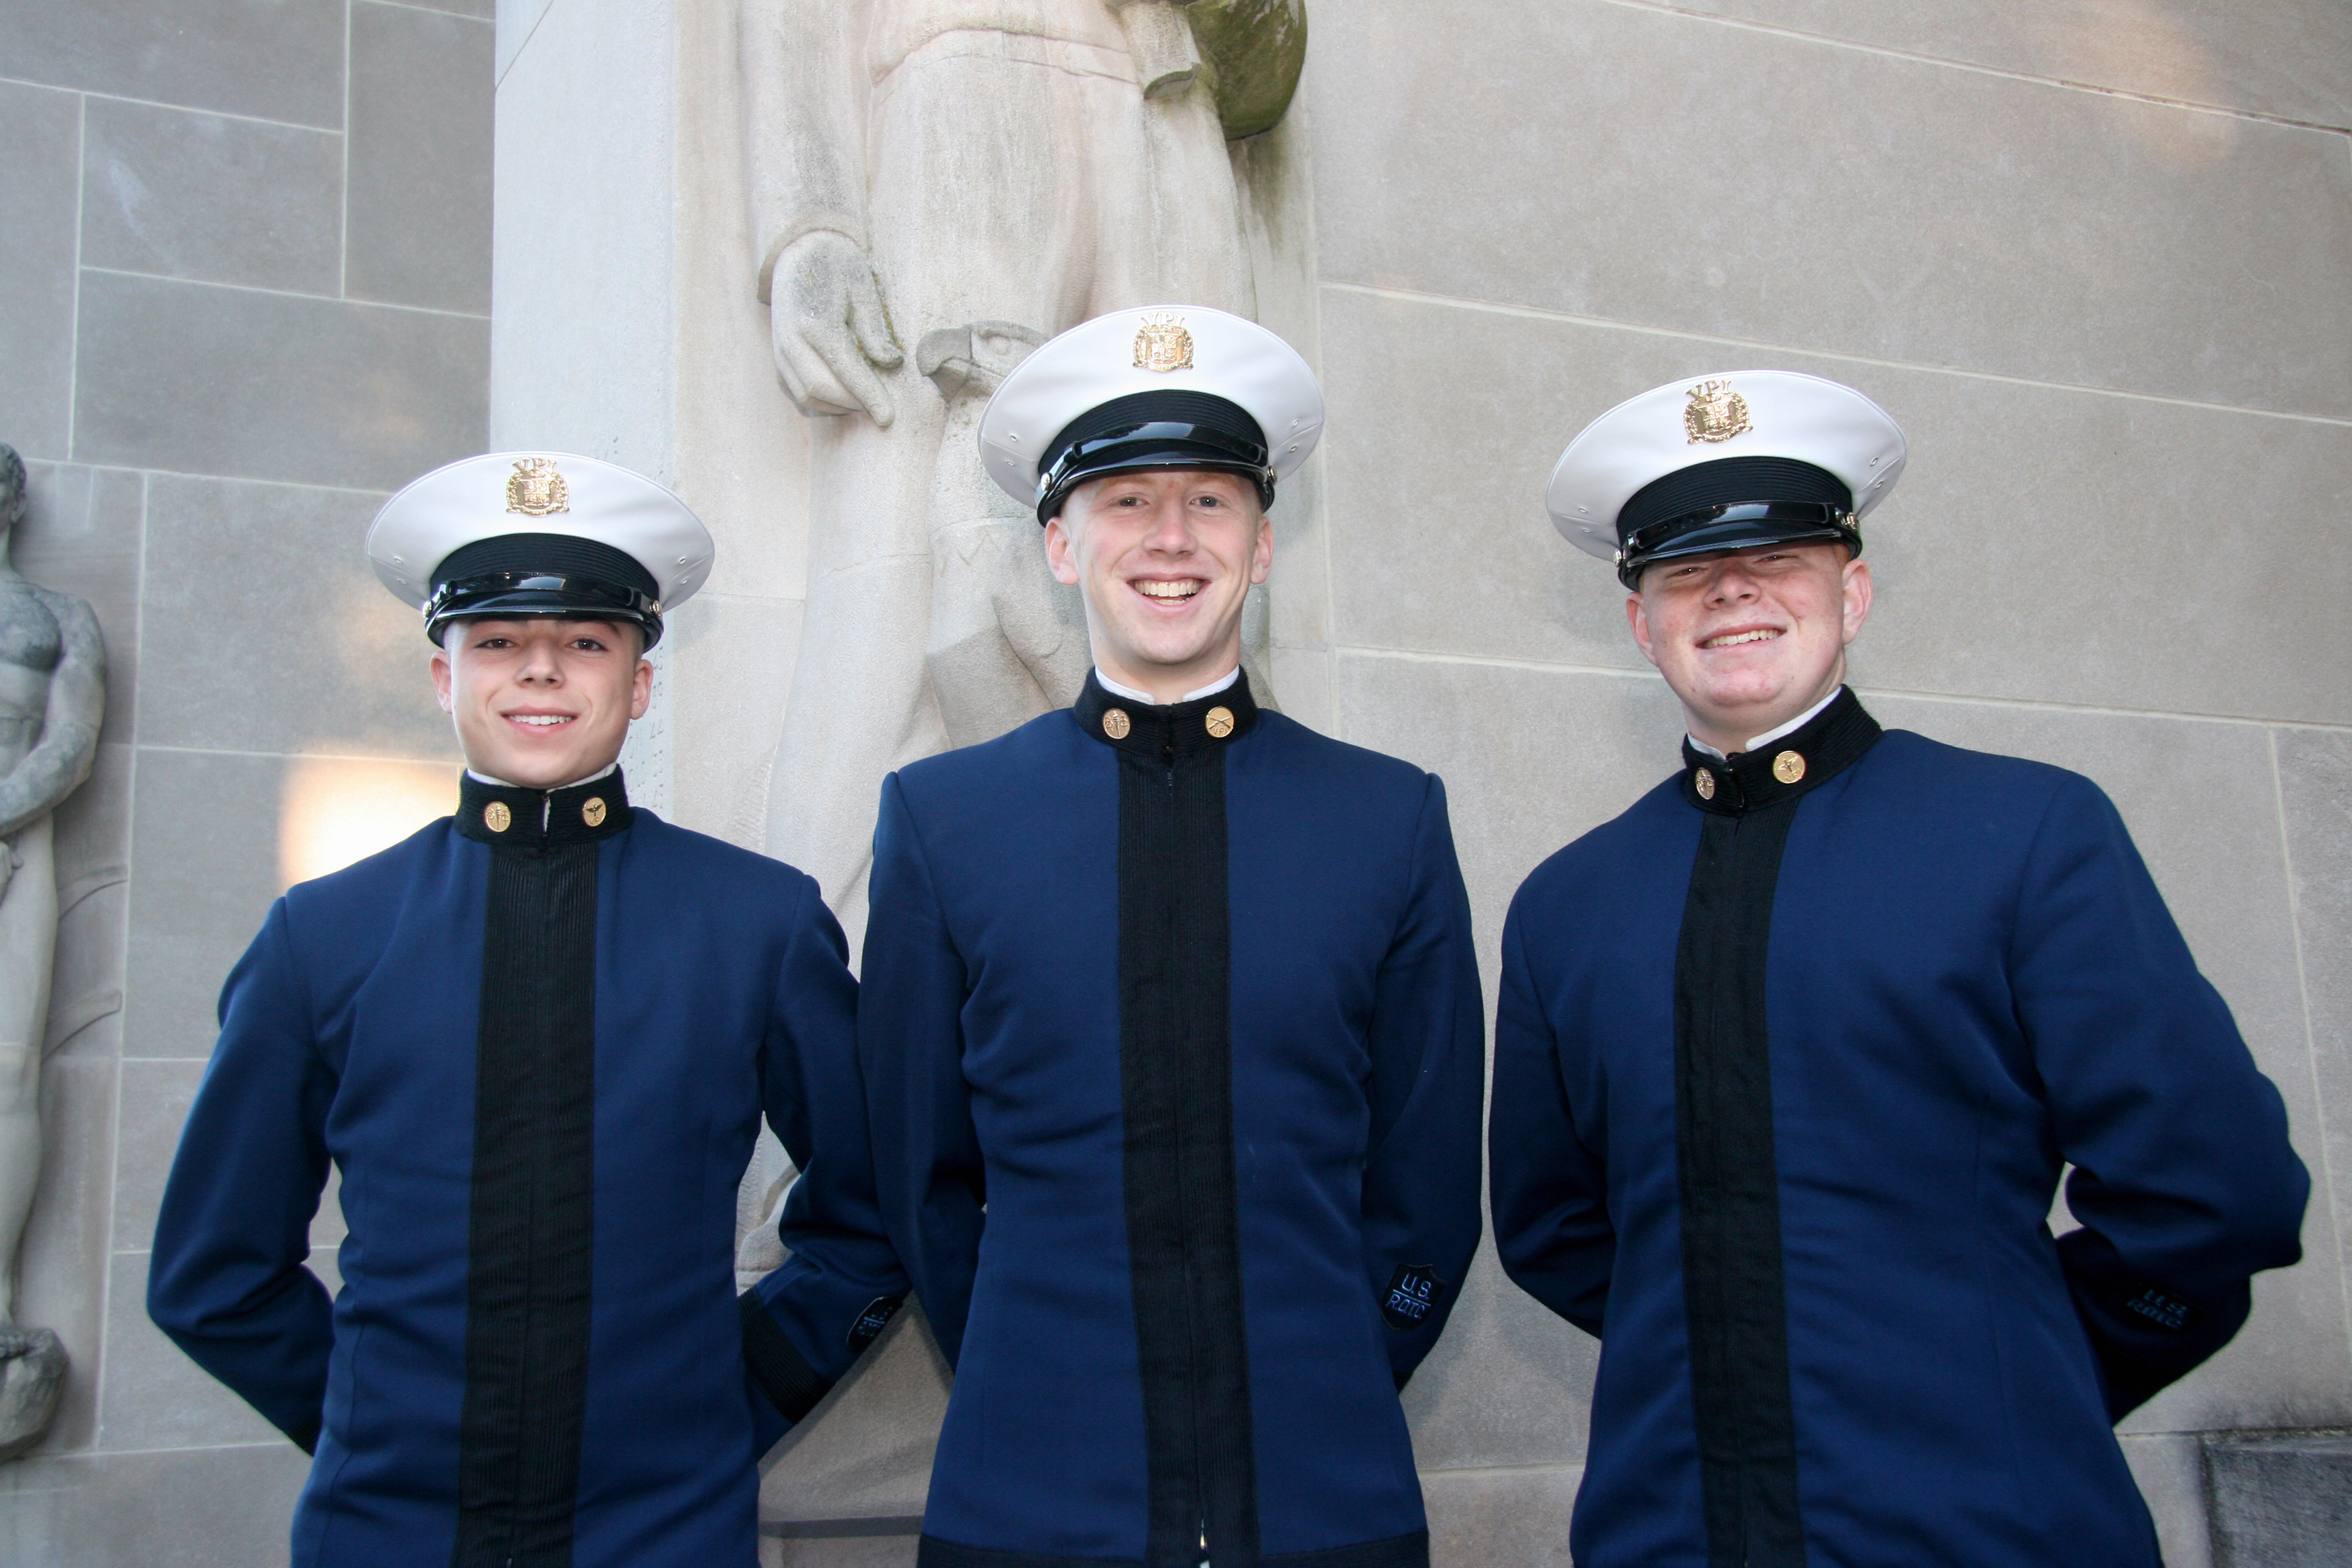 From left to right are Cadets Joshua Schnaitman, Richard Smullen, and William Frosell